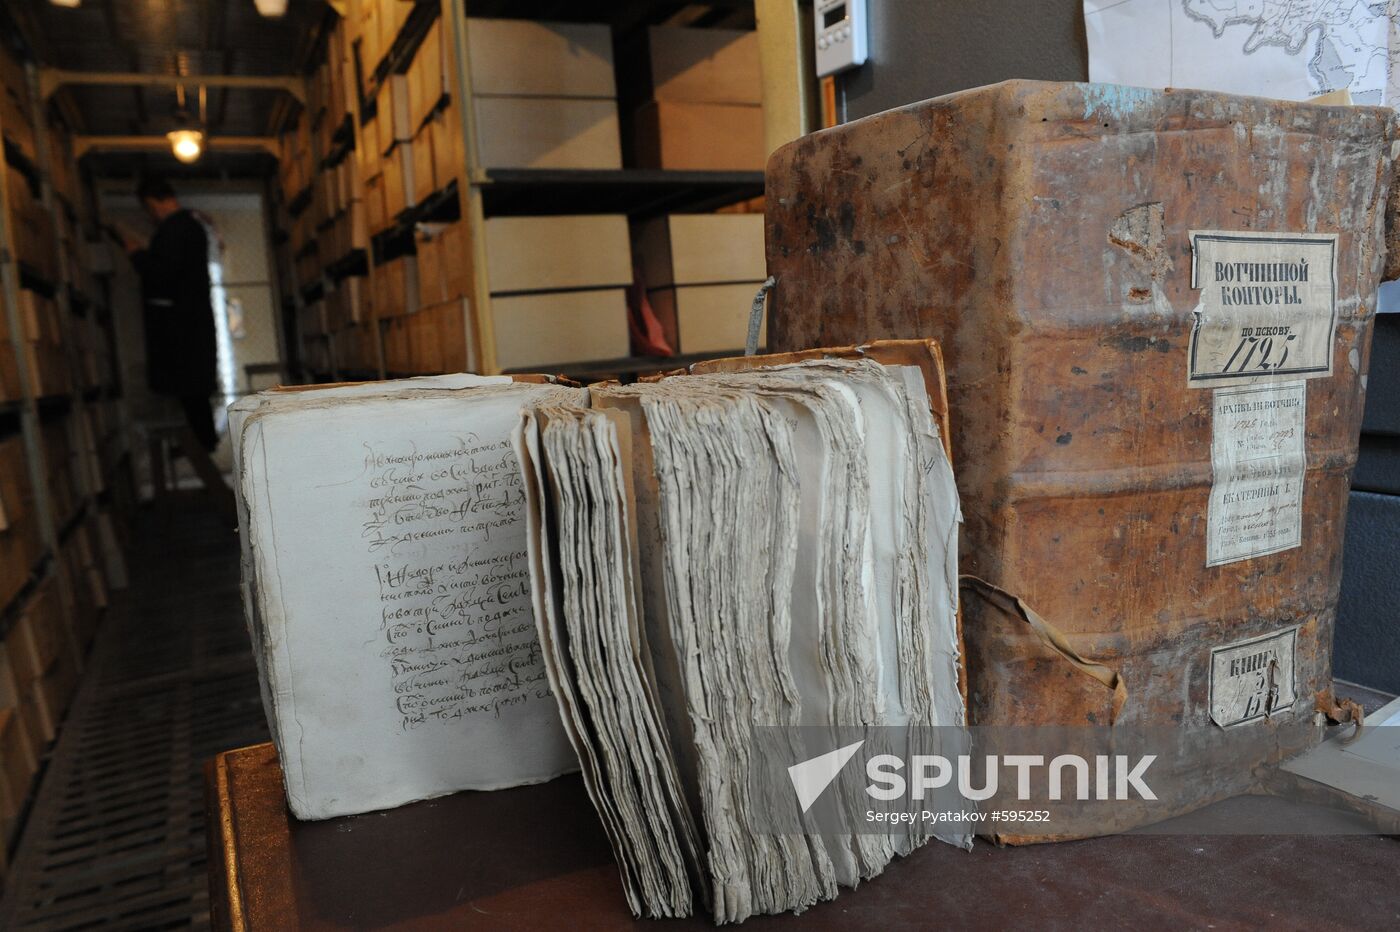 Documents of patrimonial office